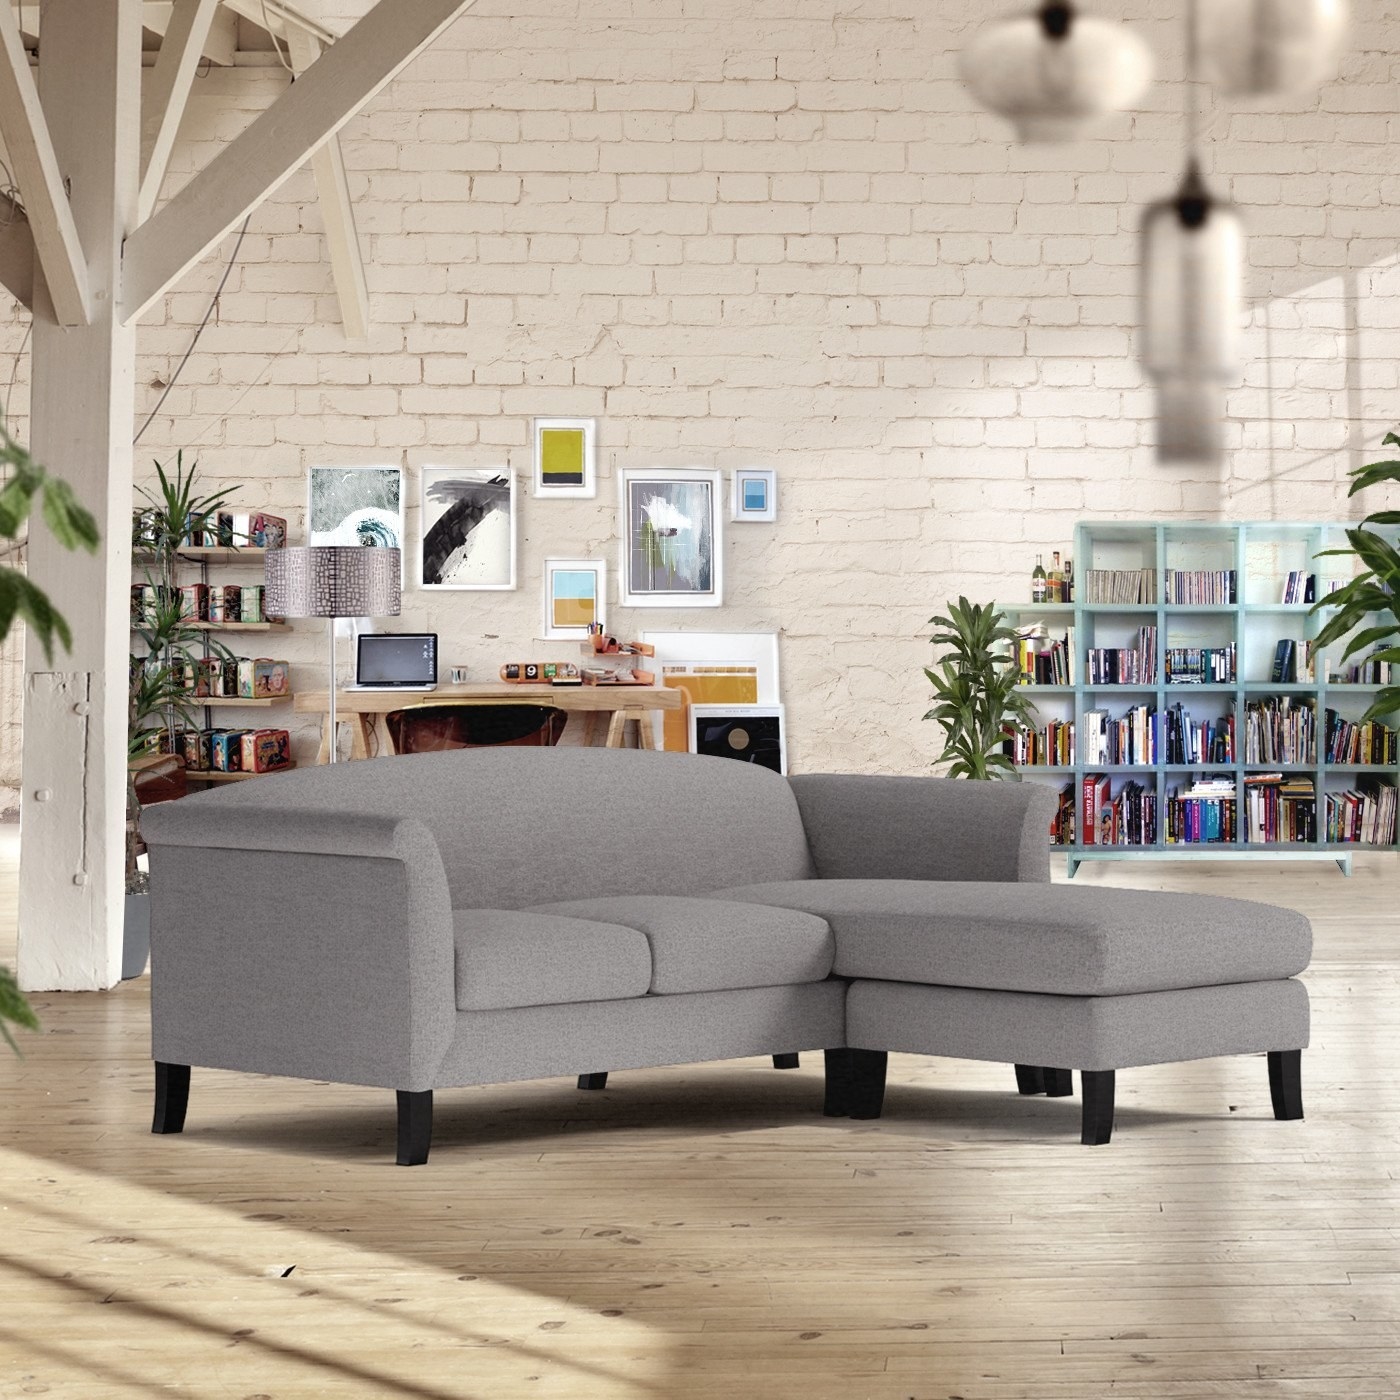 The gray sectional on display with home furnishings behind it